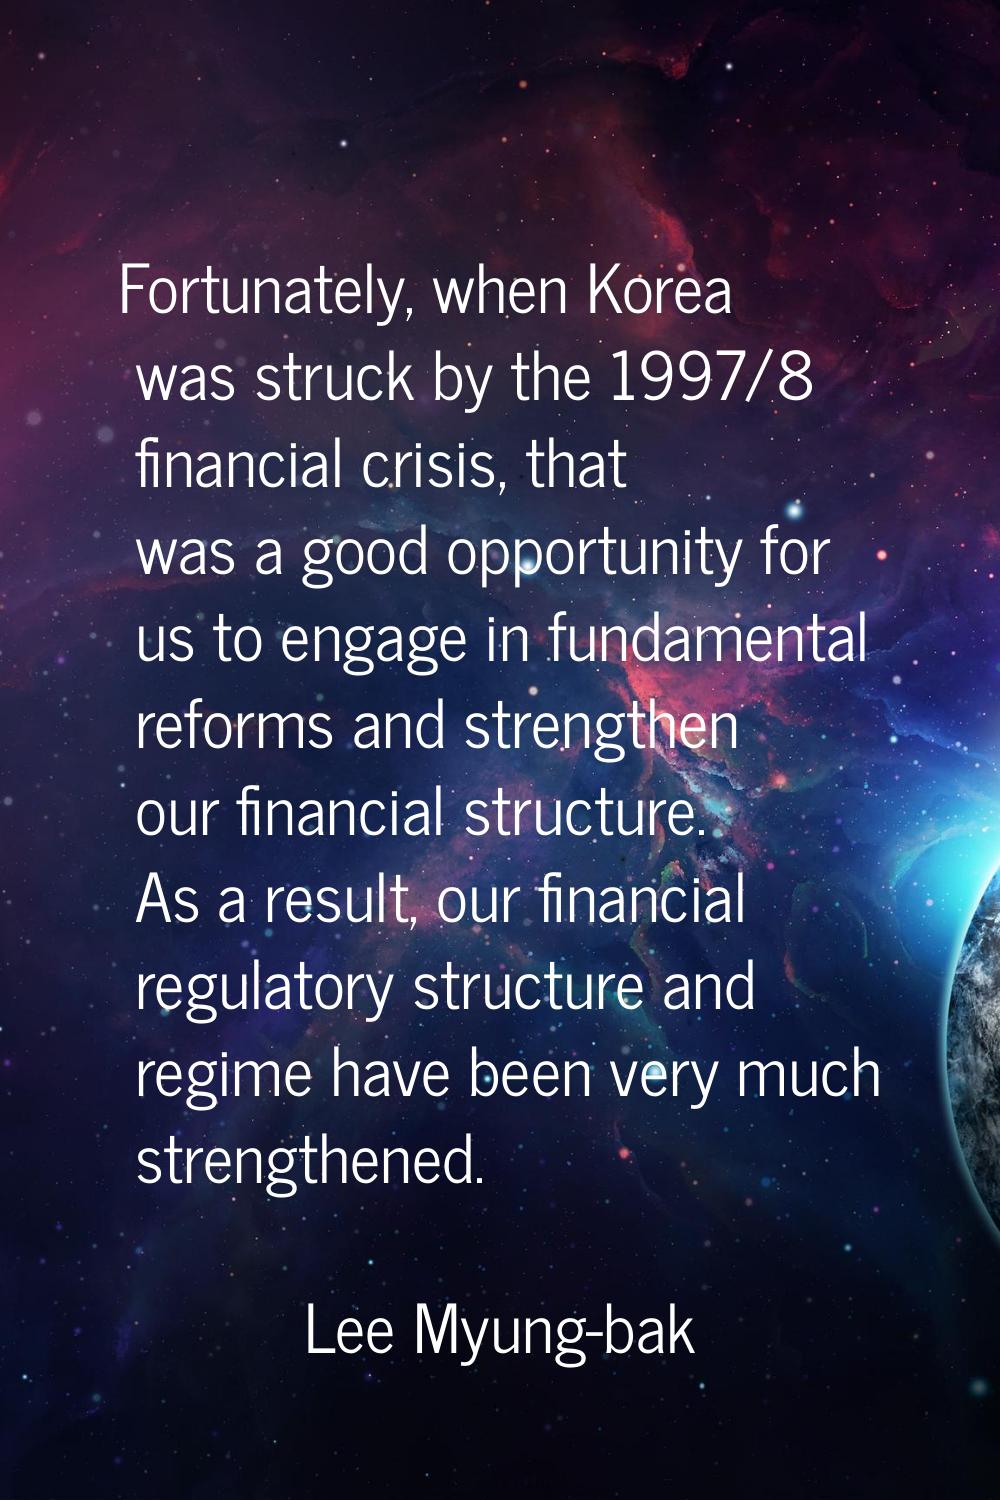 Fortunately, when Korea was struck by the 1997/8 financial crisis, that was a good opportunity for 